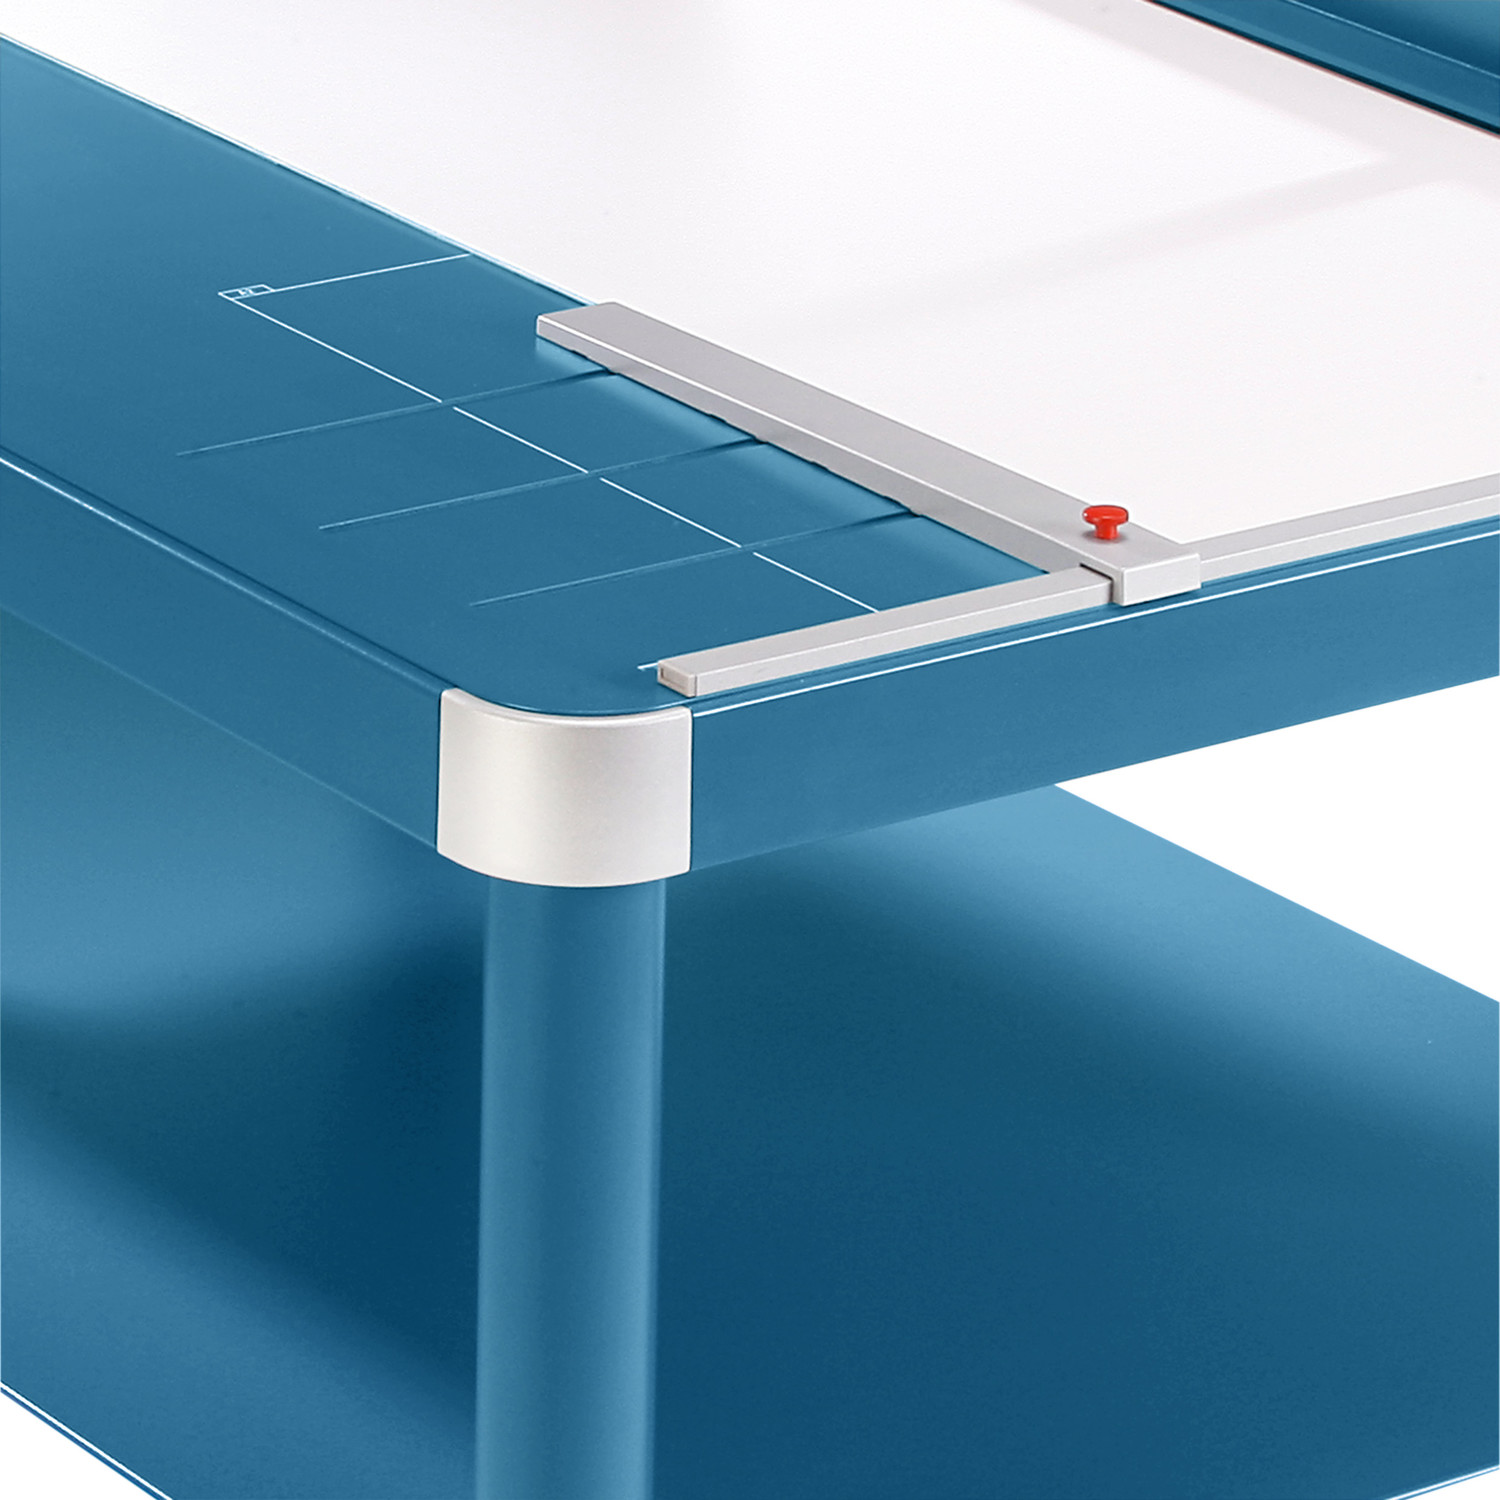 Adjustable metal backstop in guide channels for quickly finding the right format – can be used on both scale bars and the front table